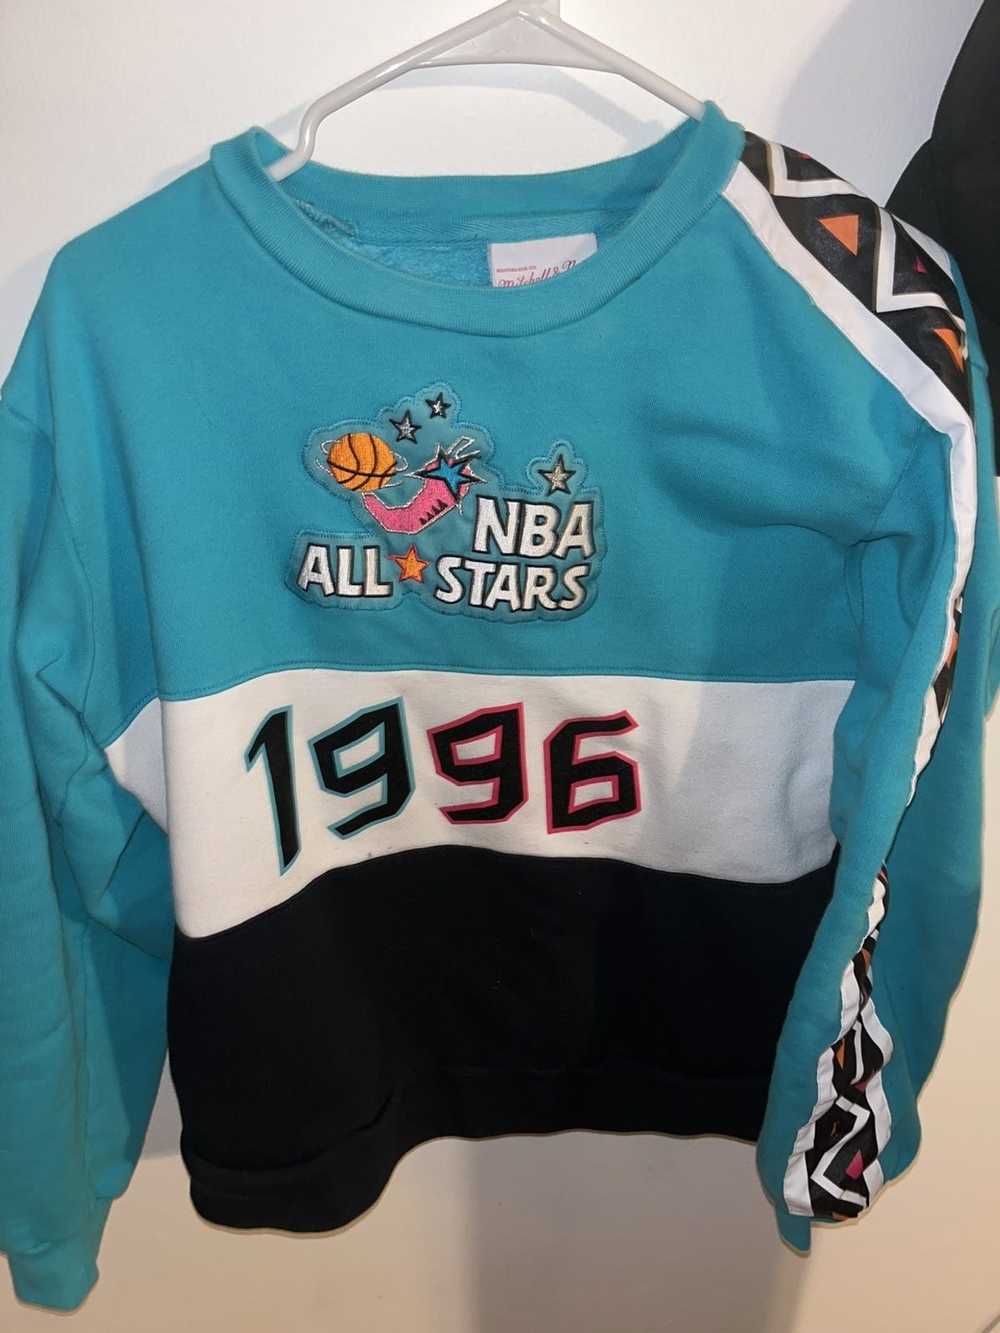 1996 NBA All Star Game Penny Hardaway Jersey Mitchell & Ness for Sale in  Las Vegas, NV - OfferUp